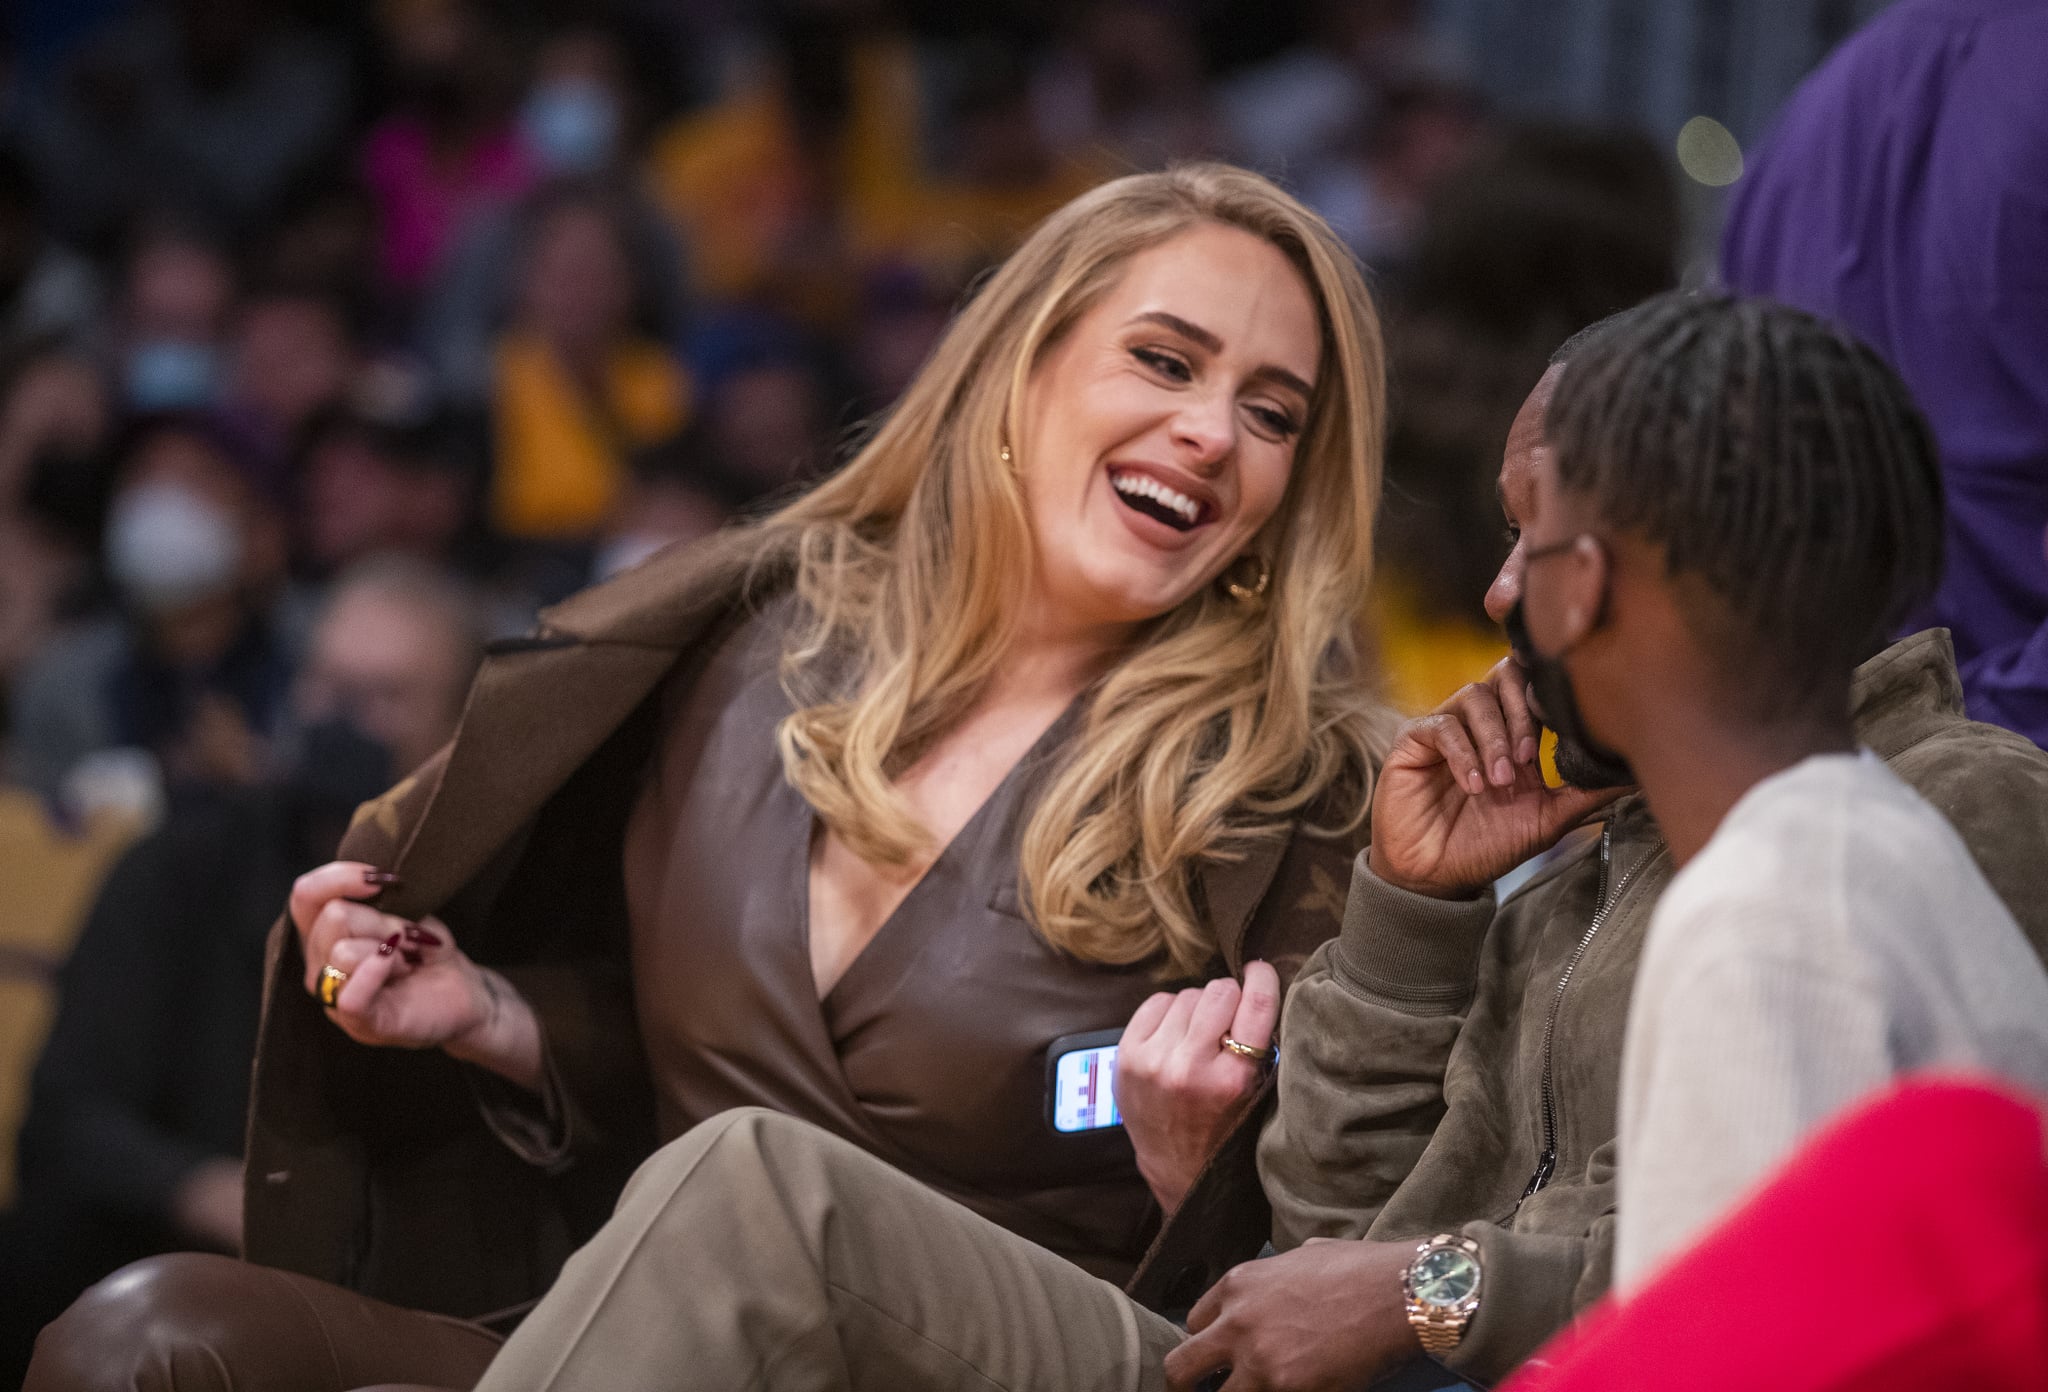 Los Angeles, CA - October 19: Singer Adele attends a game between the Golden State Warriors and the Los Angeles Lakers on October 19, 2021 at STAPLES Centre in Los Angeles. (Allen J. Schaben / Los Angeles Times via Getty Images).